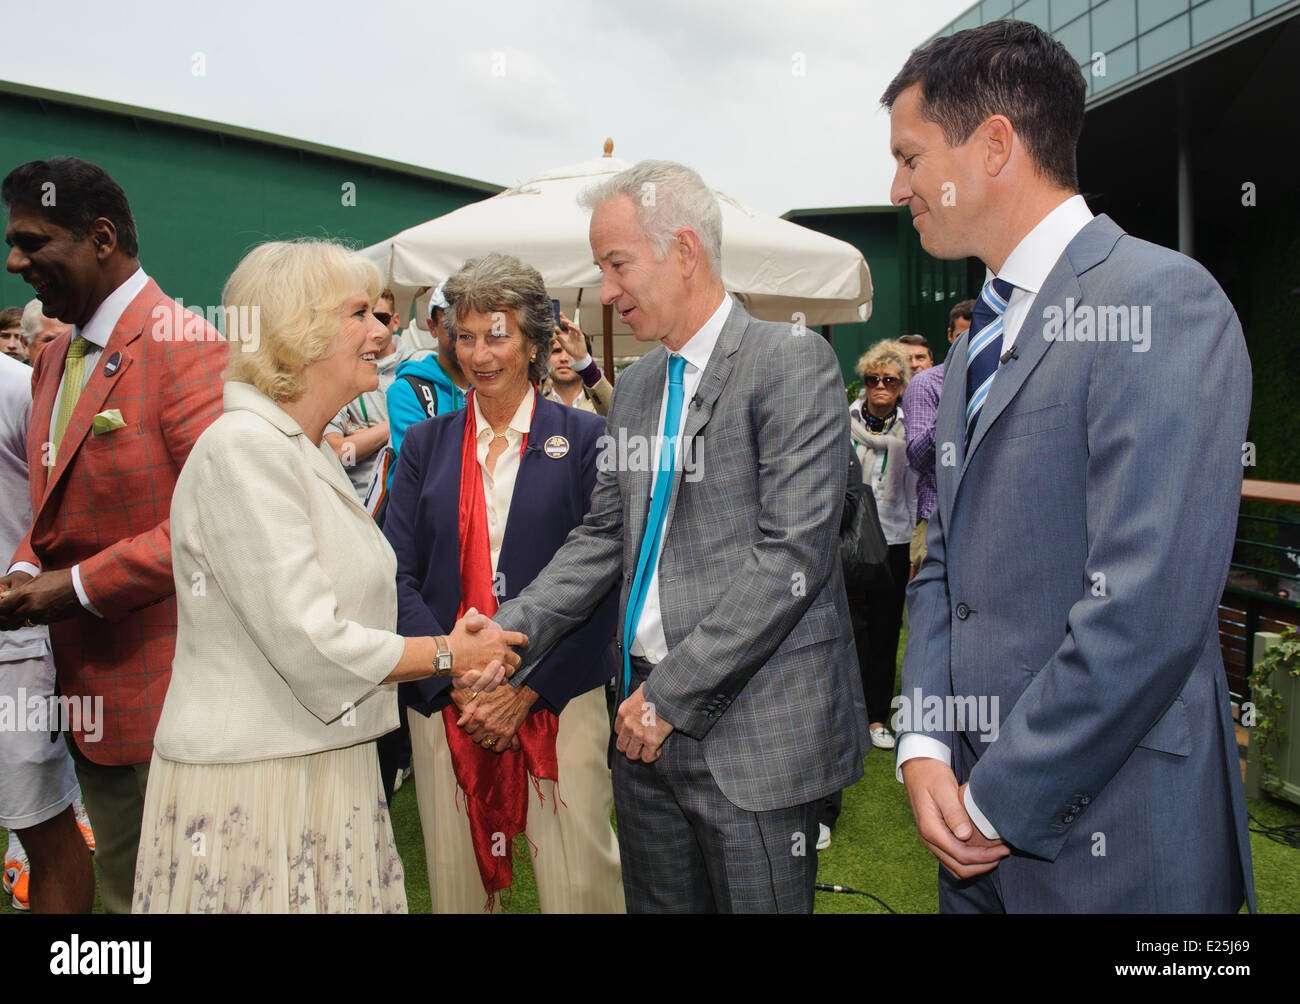 Britain's Camilla, The Duchess of Cornwall (left) meets (from left to right) former tennis players Virginia Wade, John McEnroe and Tim Henman during a visit to the Wimbledon Tennis Championships at the All England Lawn Tennis and Croquet Club, Wimbledon. Photo by Dominic Lipinski/PA/Royal Rota- Suppled by Ian Jones Photography  Featuring: Camilla,Duchess of Cornwall,Virginia Wade,John McEnroe,Tim Henman Where: London, United Kingdom When: 27 Jun 2013 Stock Photo